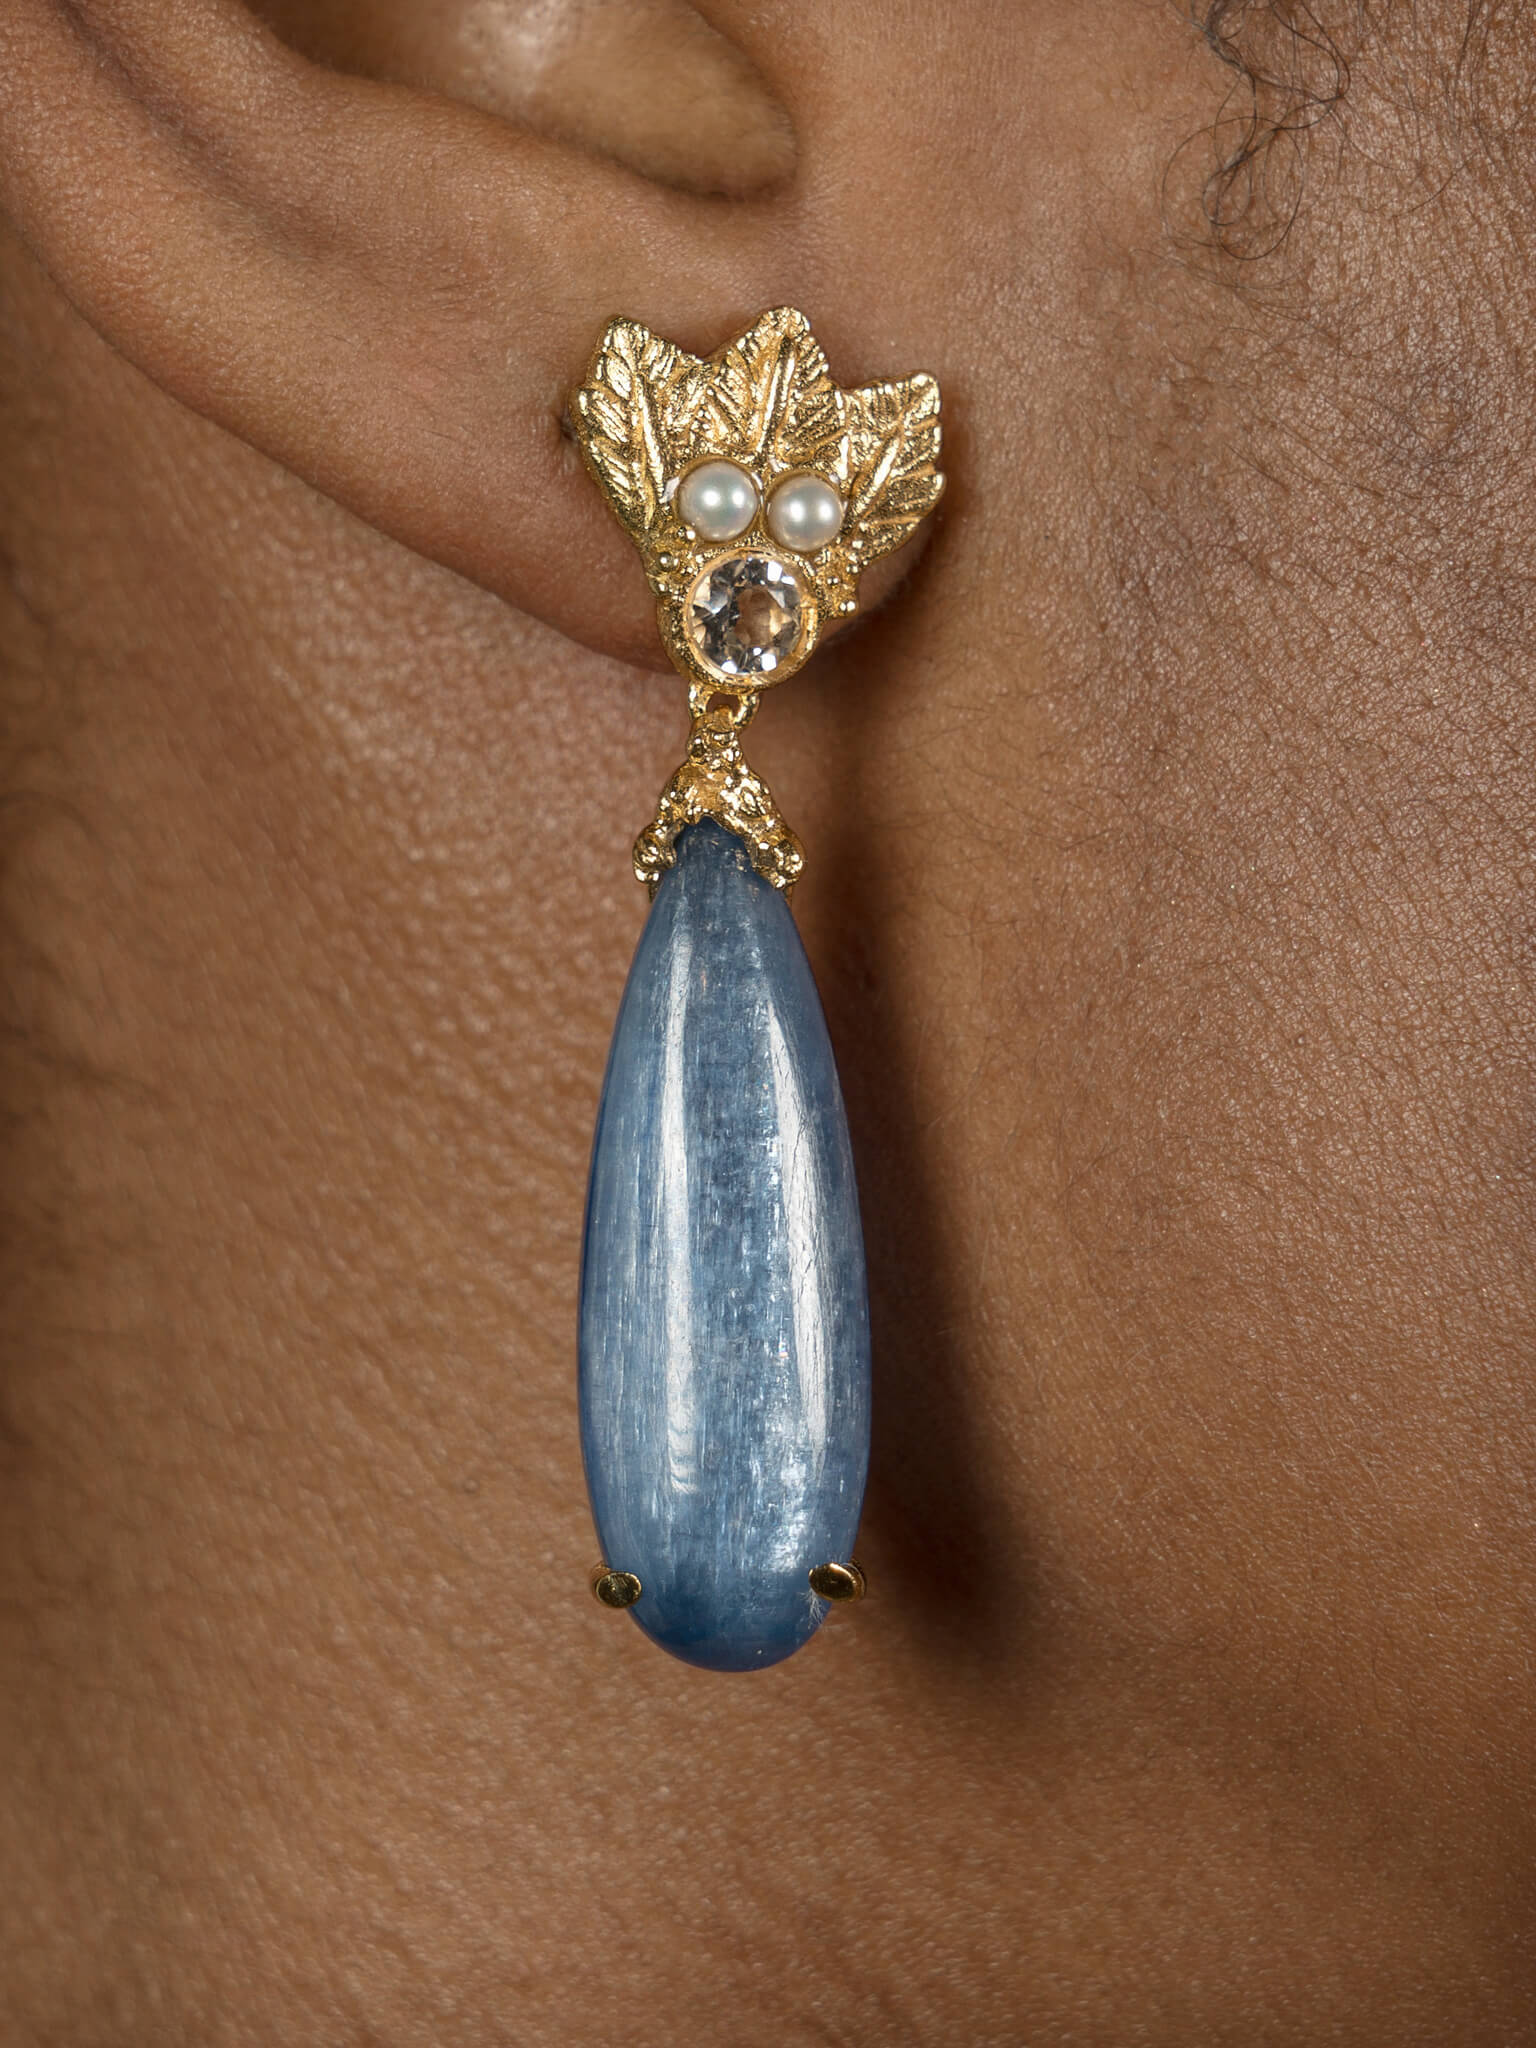 A woman's ear with a silver Cremilde Bispo Jewellery Muse III Kyanite earring, adorned with a blue teardrop, dangling from it.